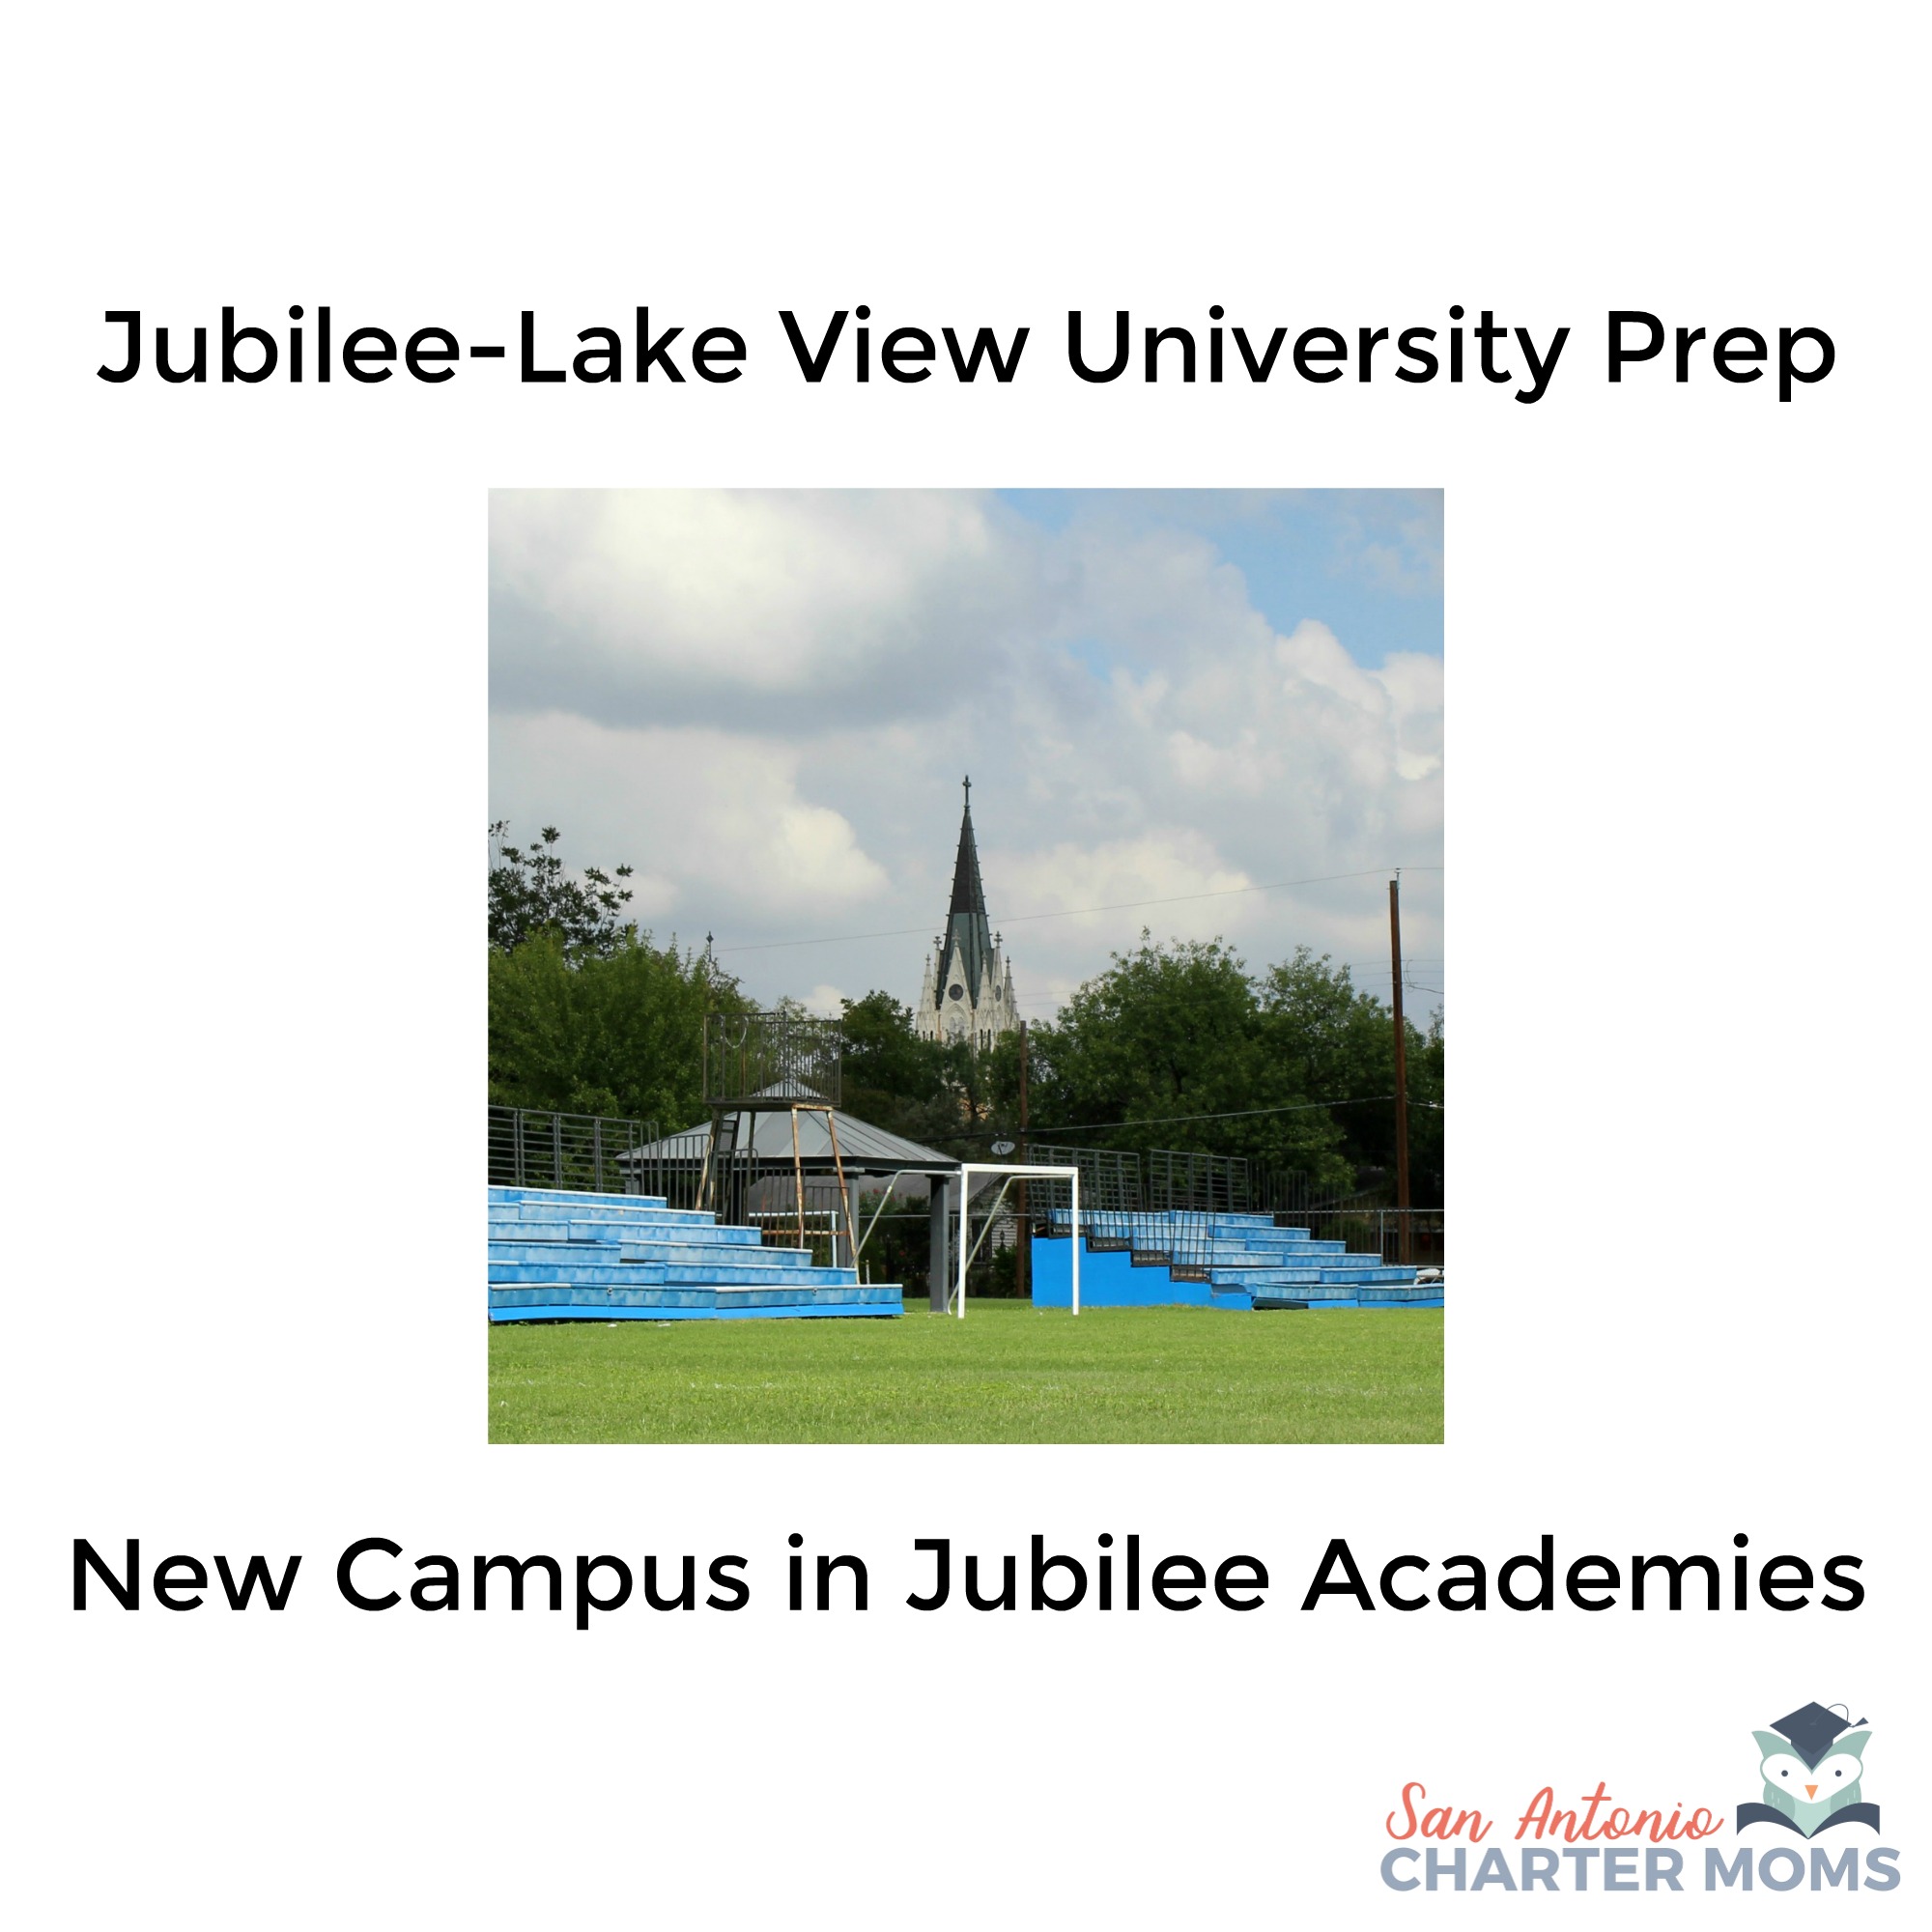 Jubilee--Lake View University Prep Is the Newest Campus in the Jubilee Academies Family | San Antonio Charter Moms